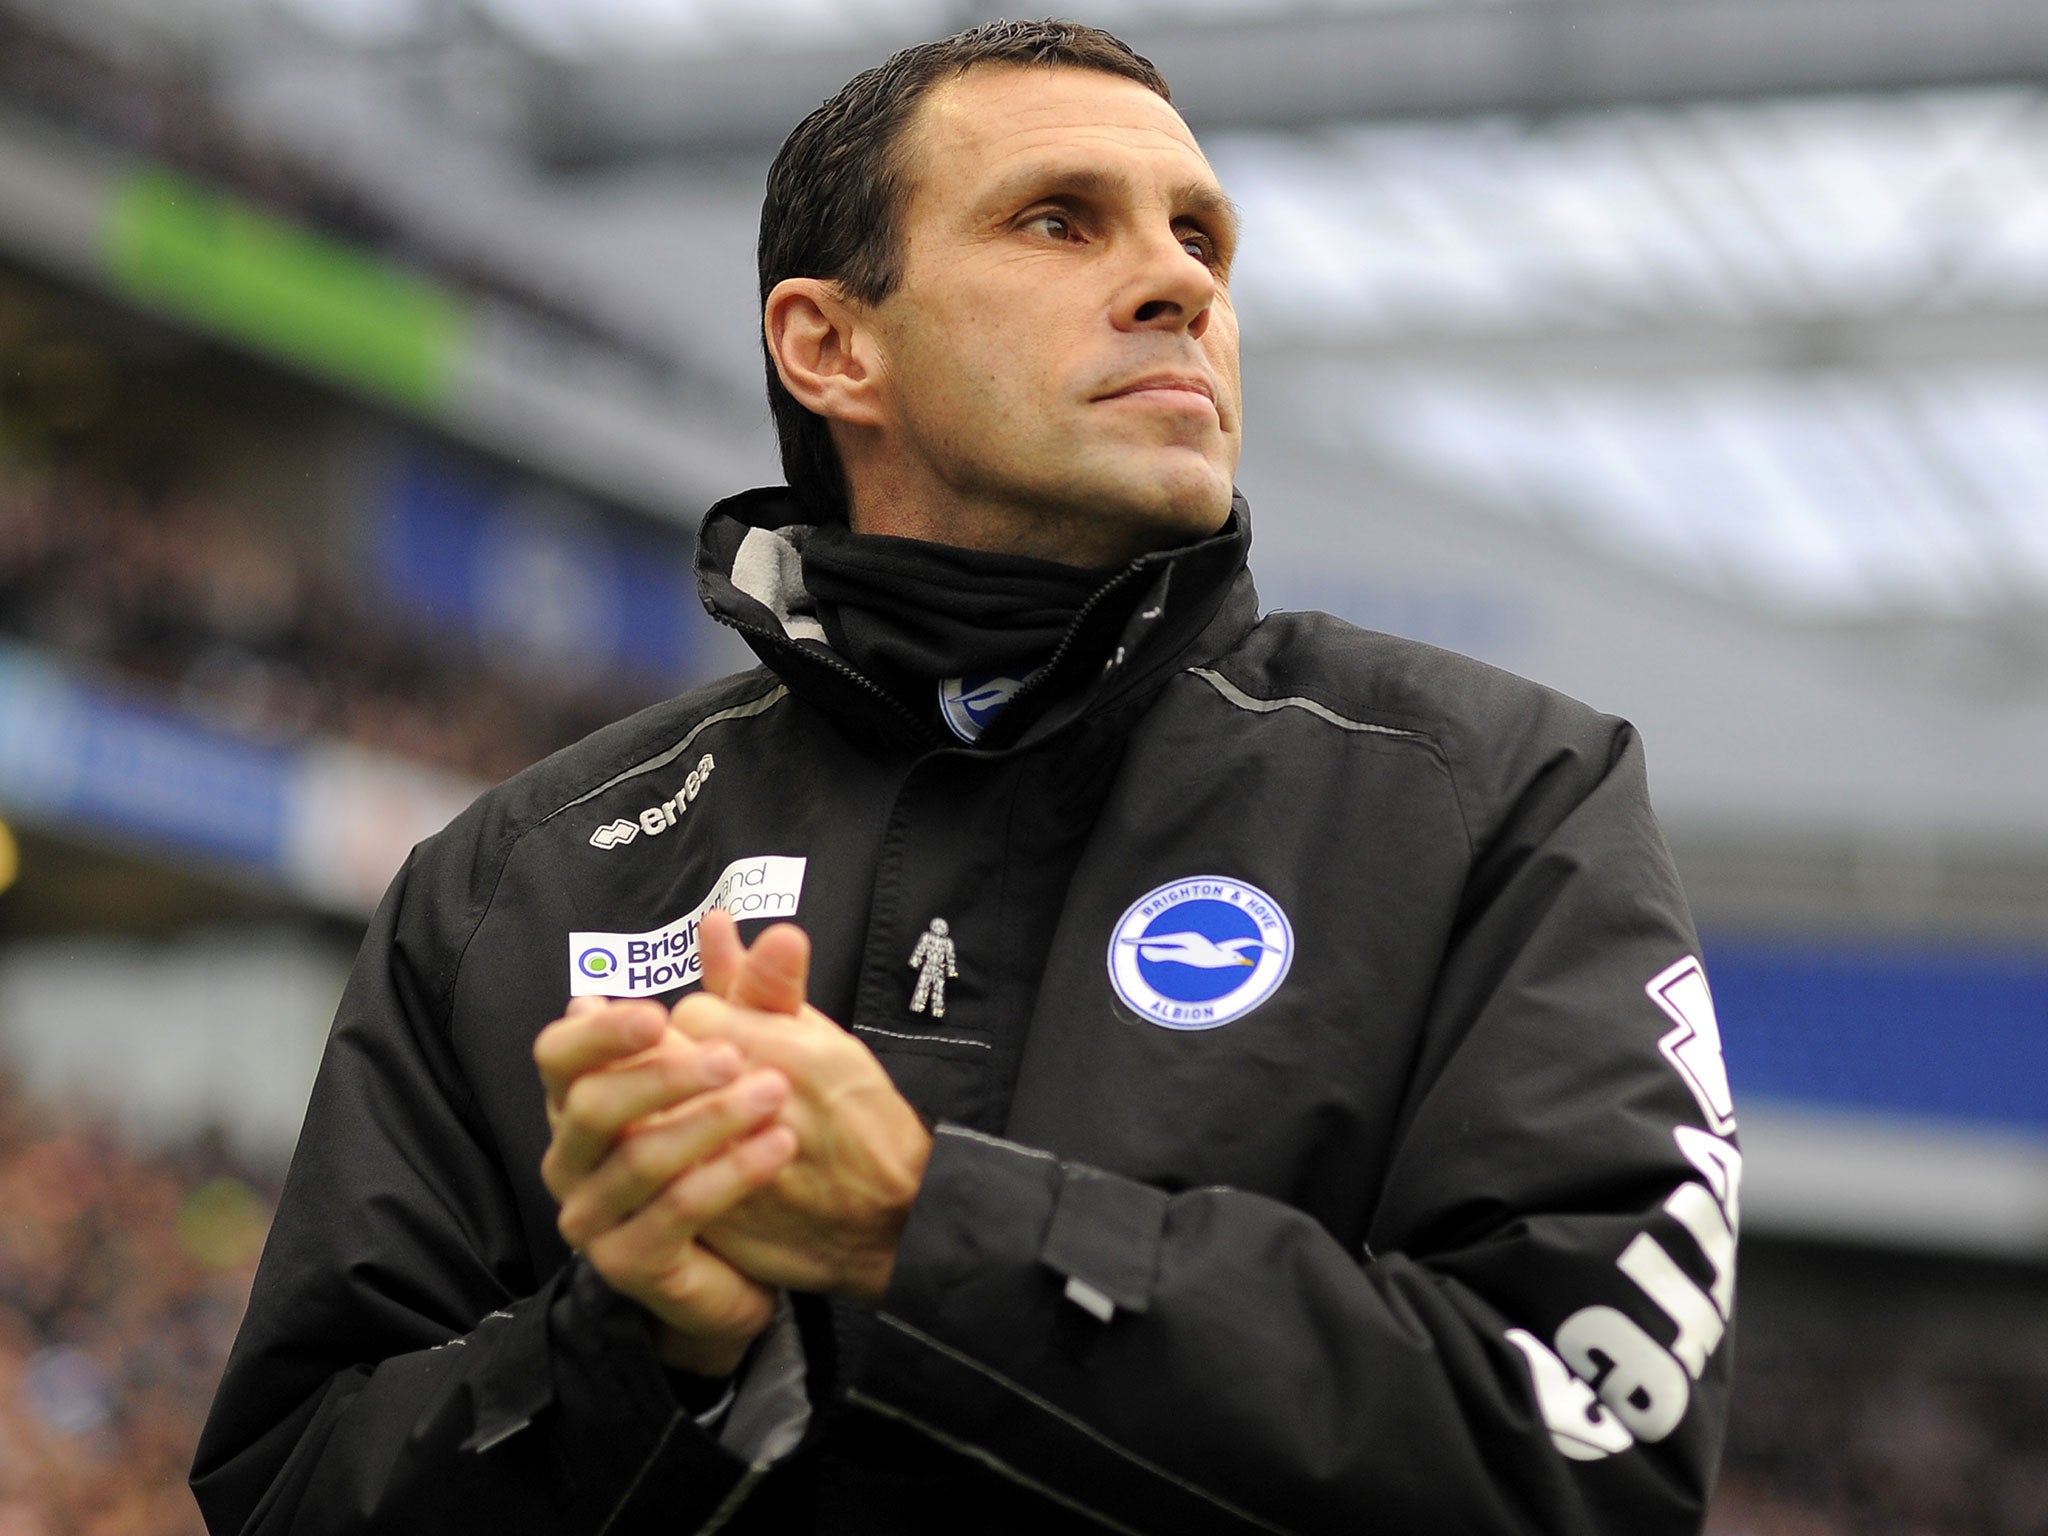 Gus Poyet said that he deserved more respect